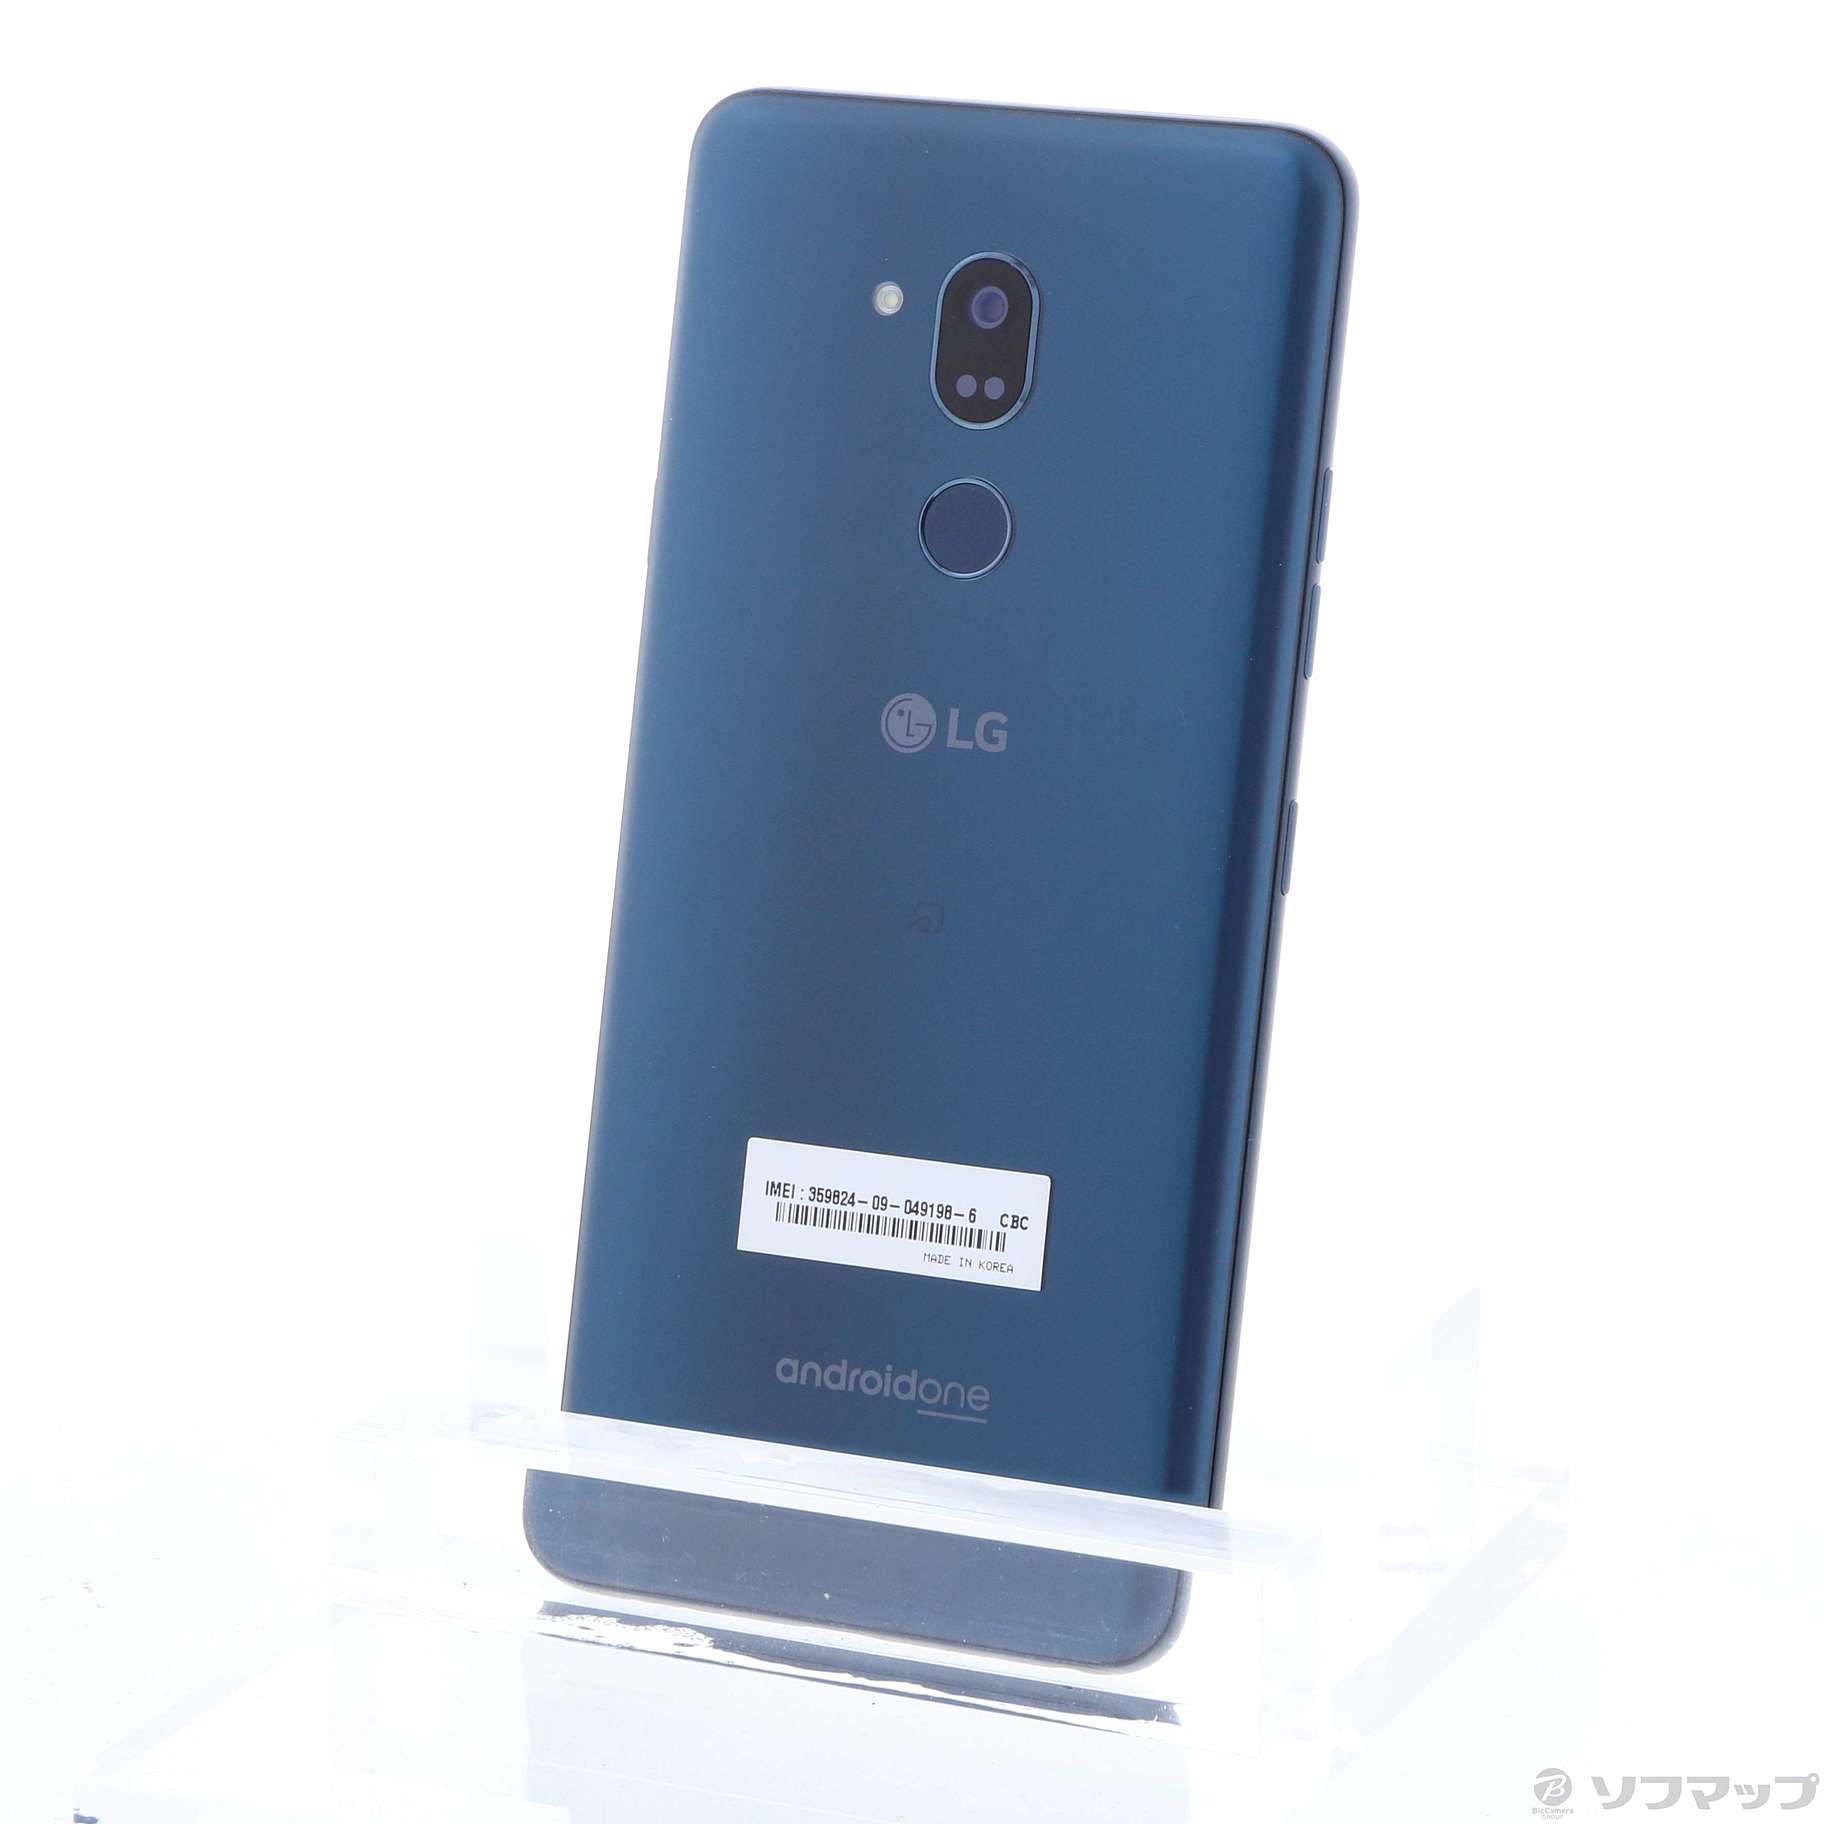 Android One X5 32GB ニューモロッカンブルー X5-LG Y!mobile